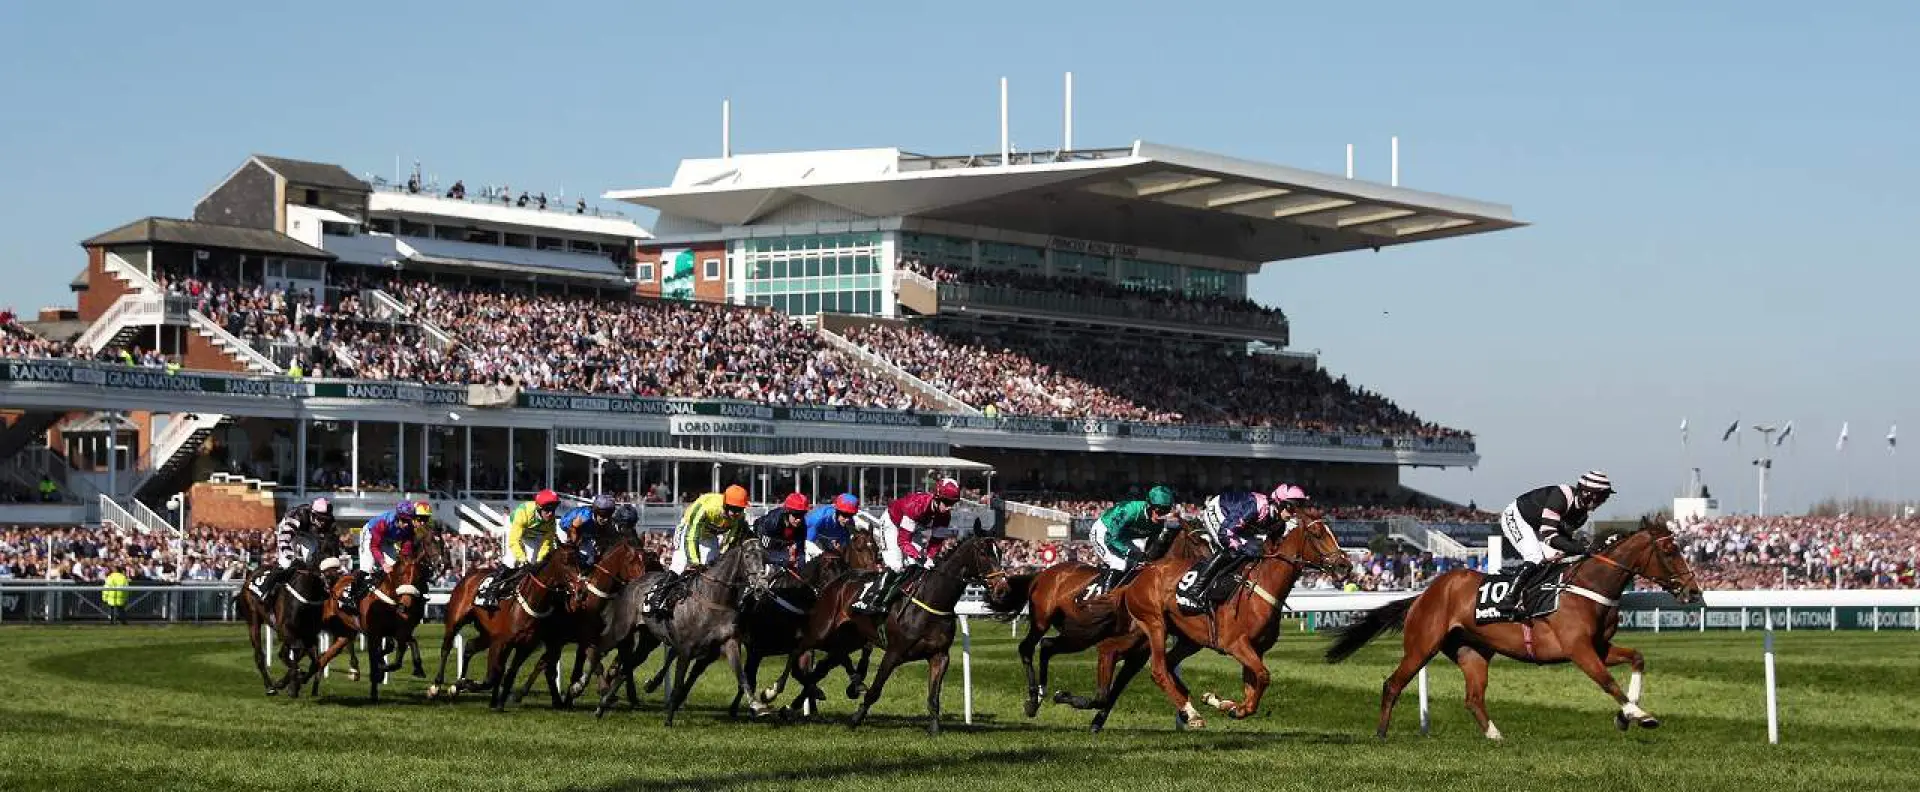 grand national guide 2018